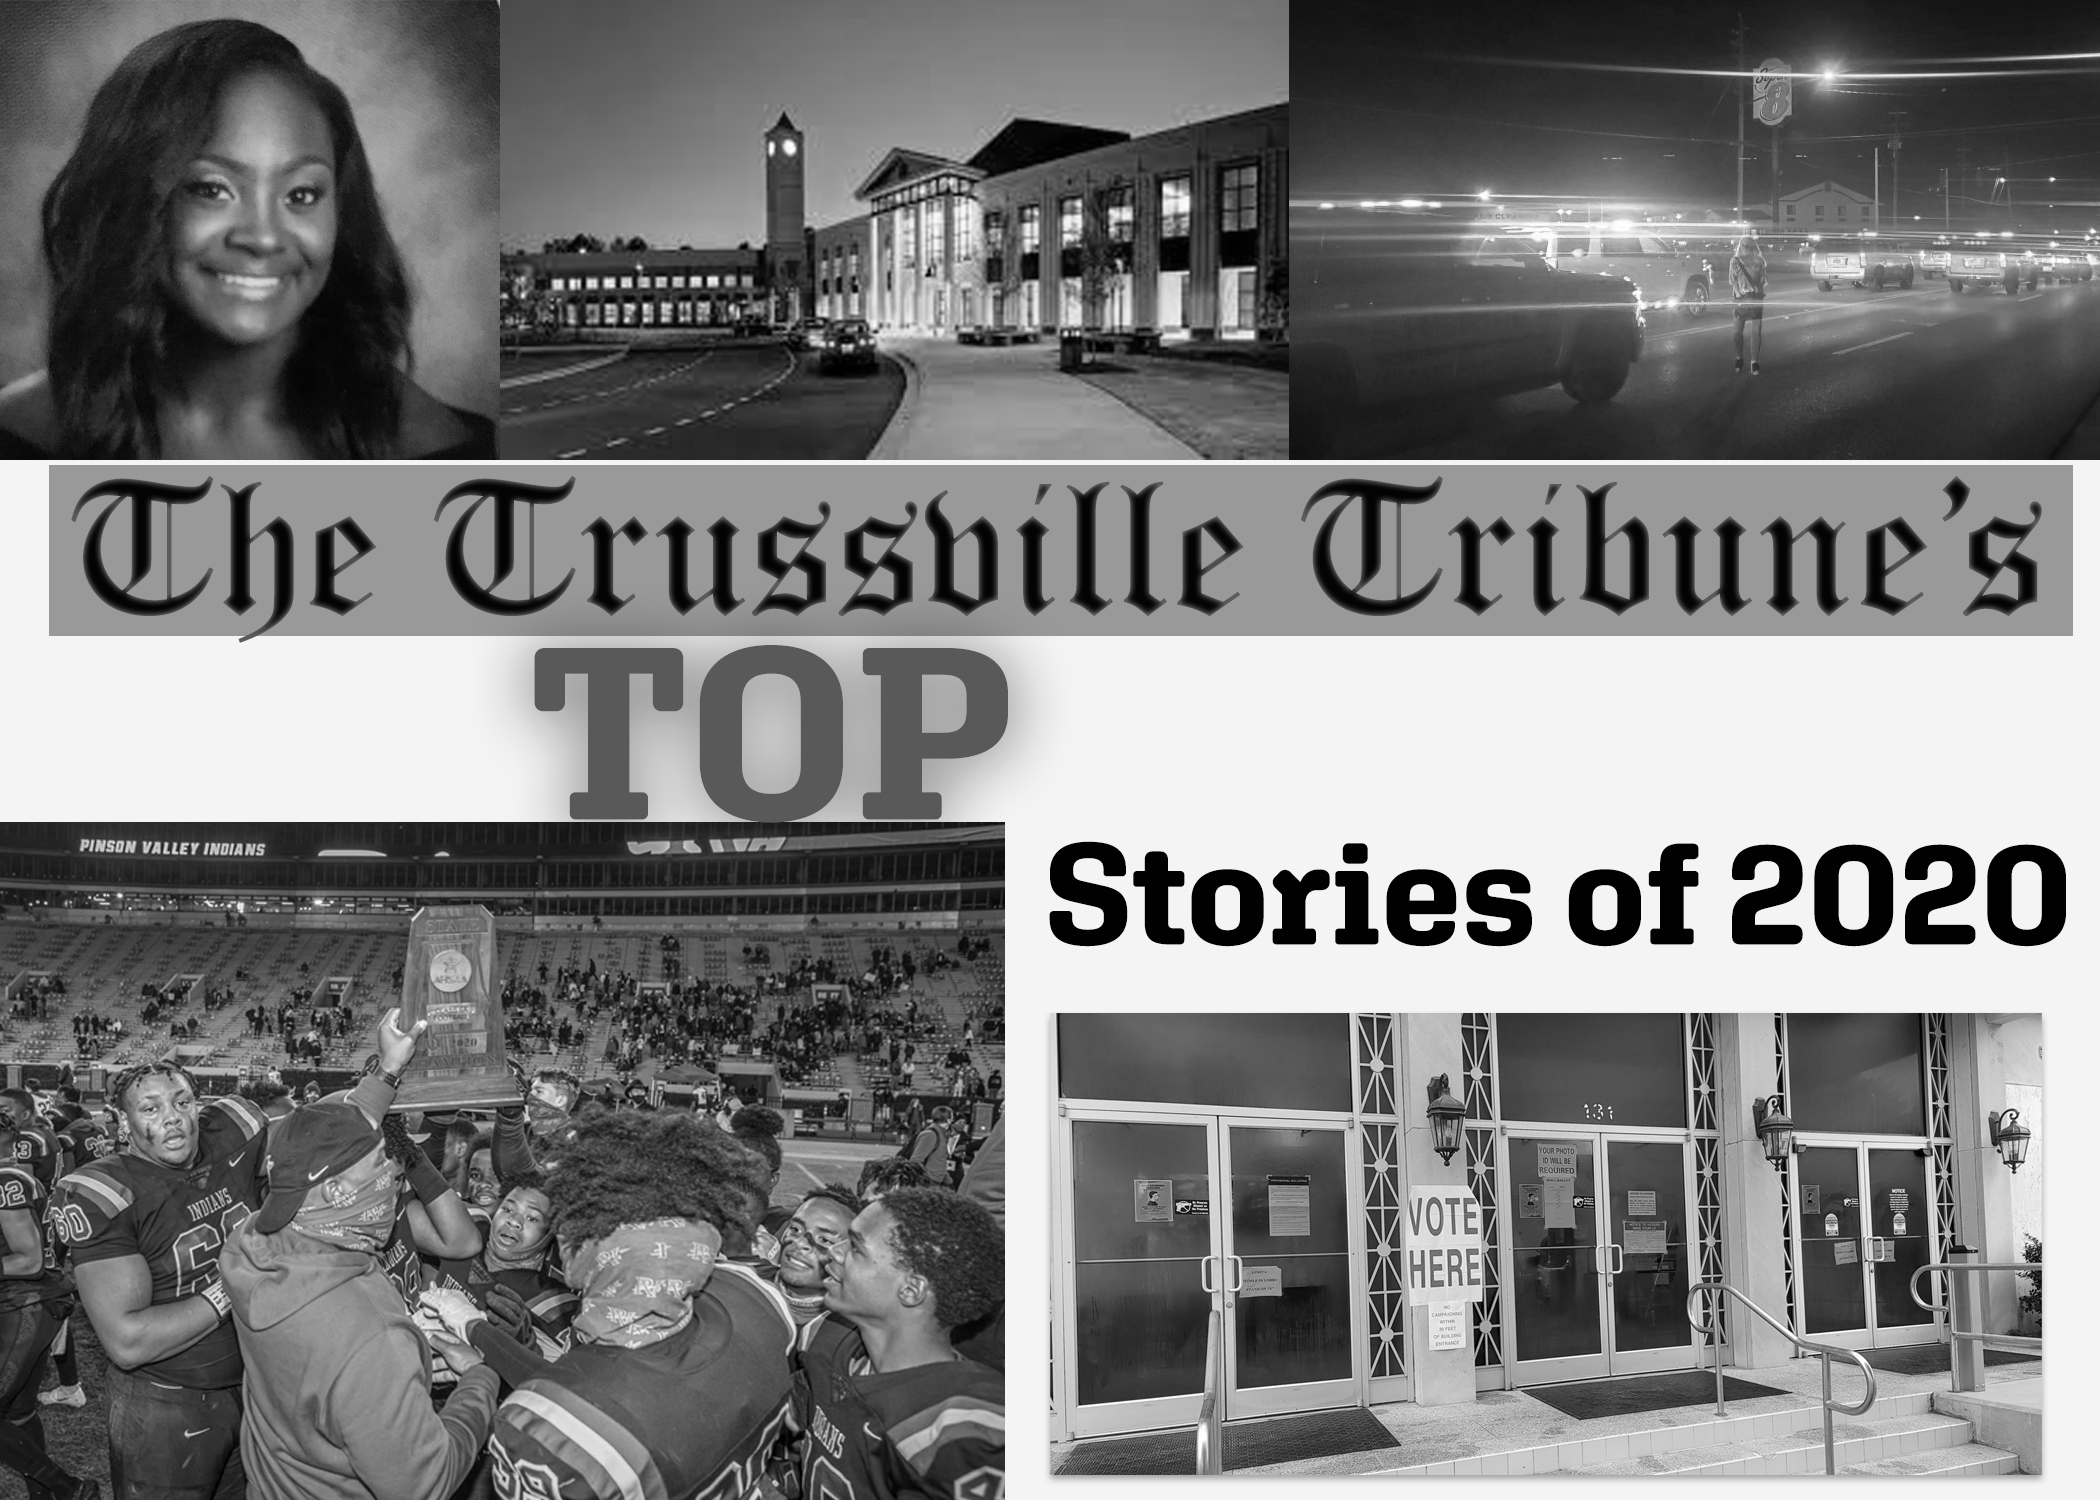 The Trussville Tribune's Top Stories of 2020